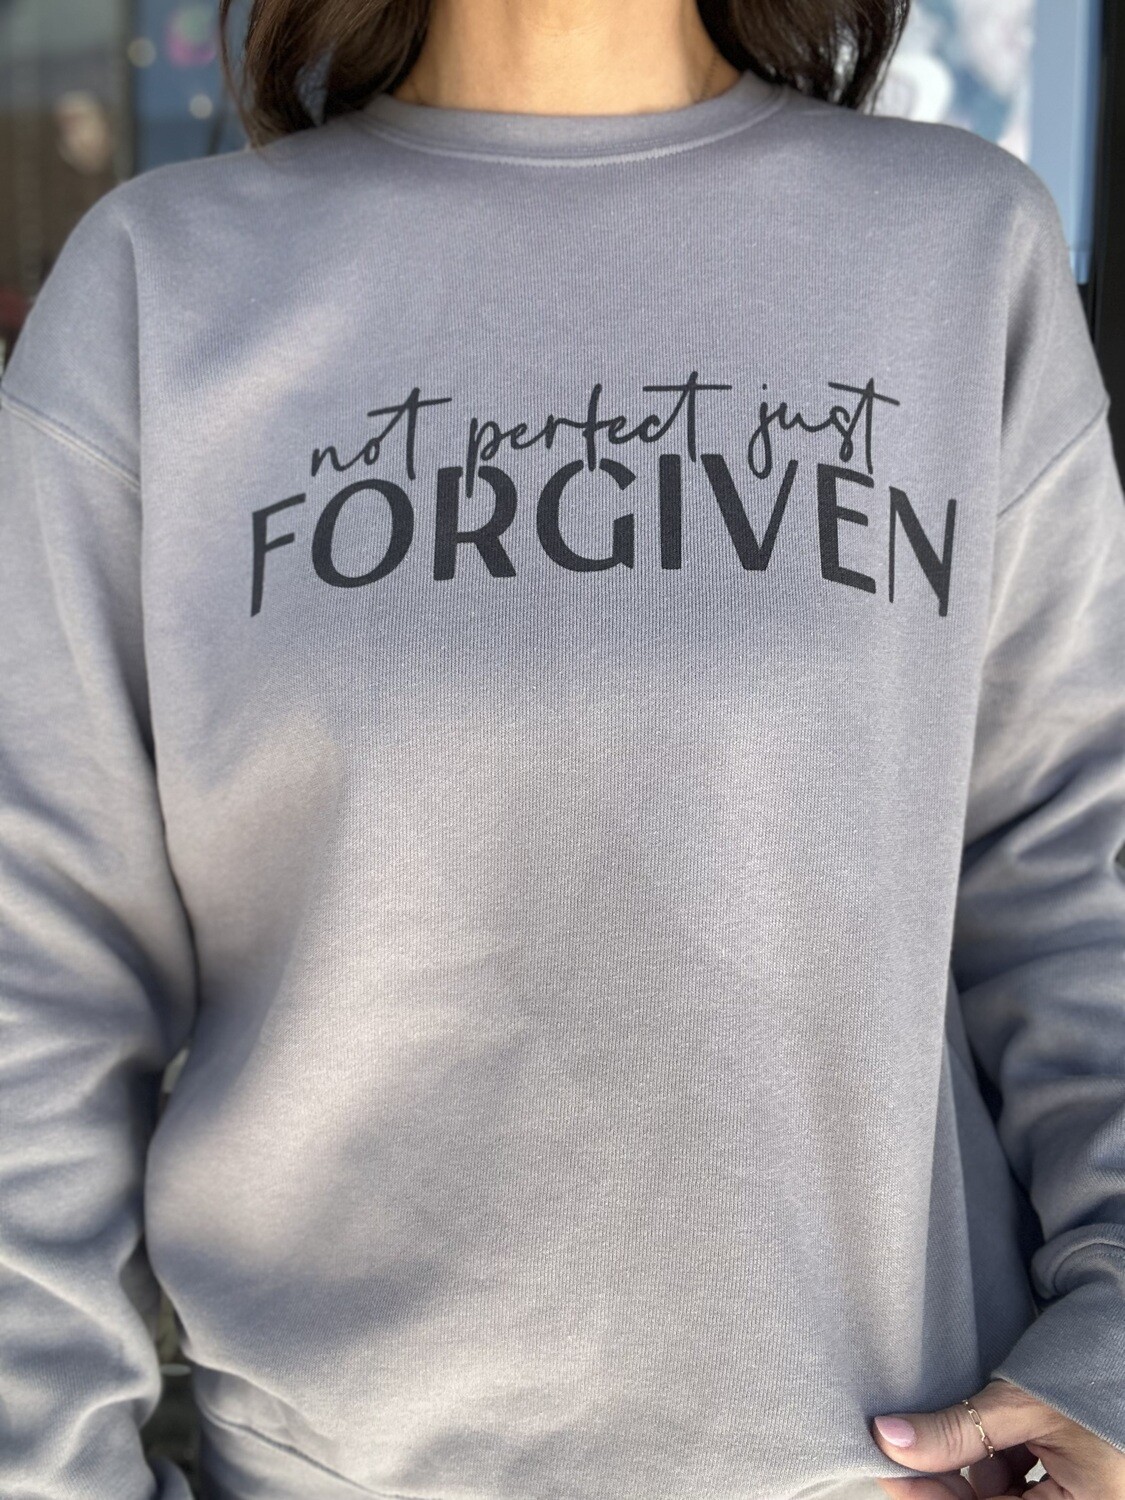 Not Perfect... Forgiven